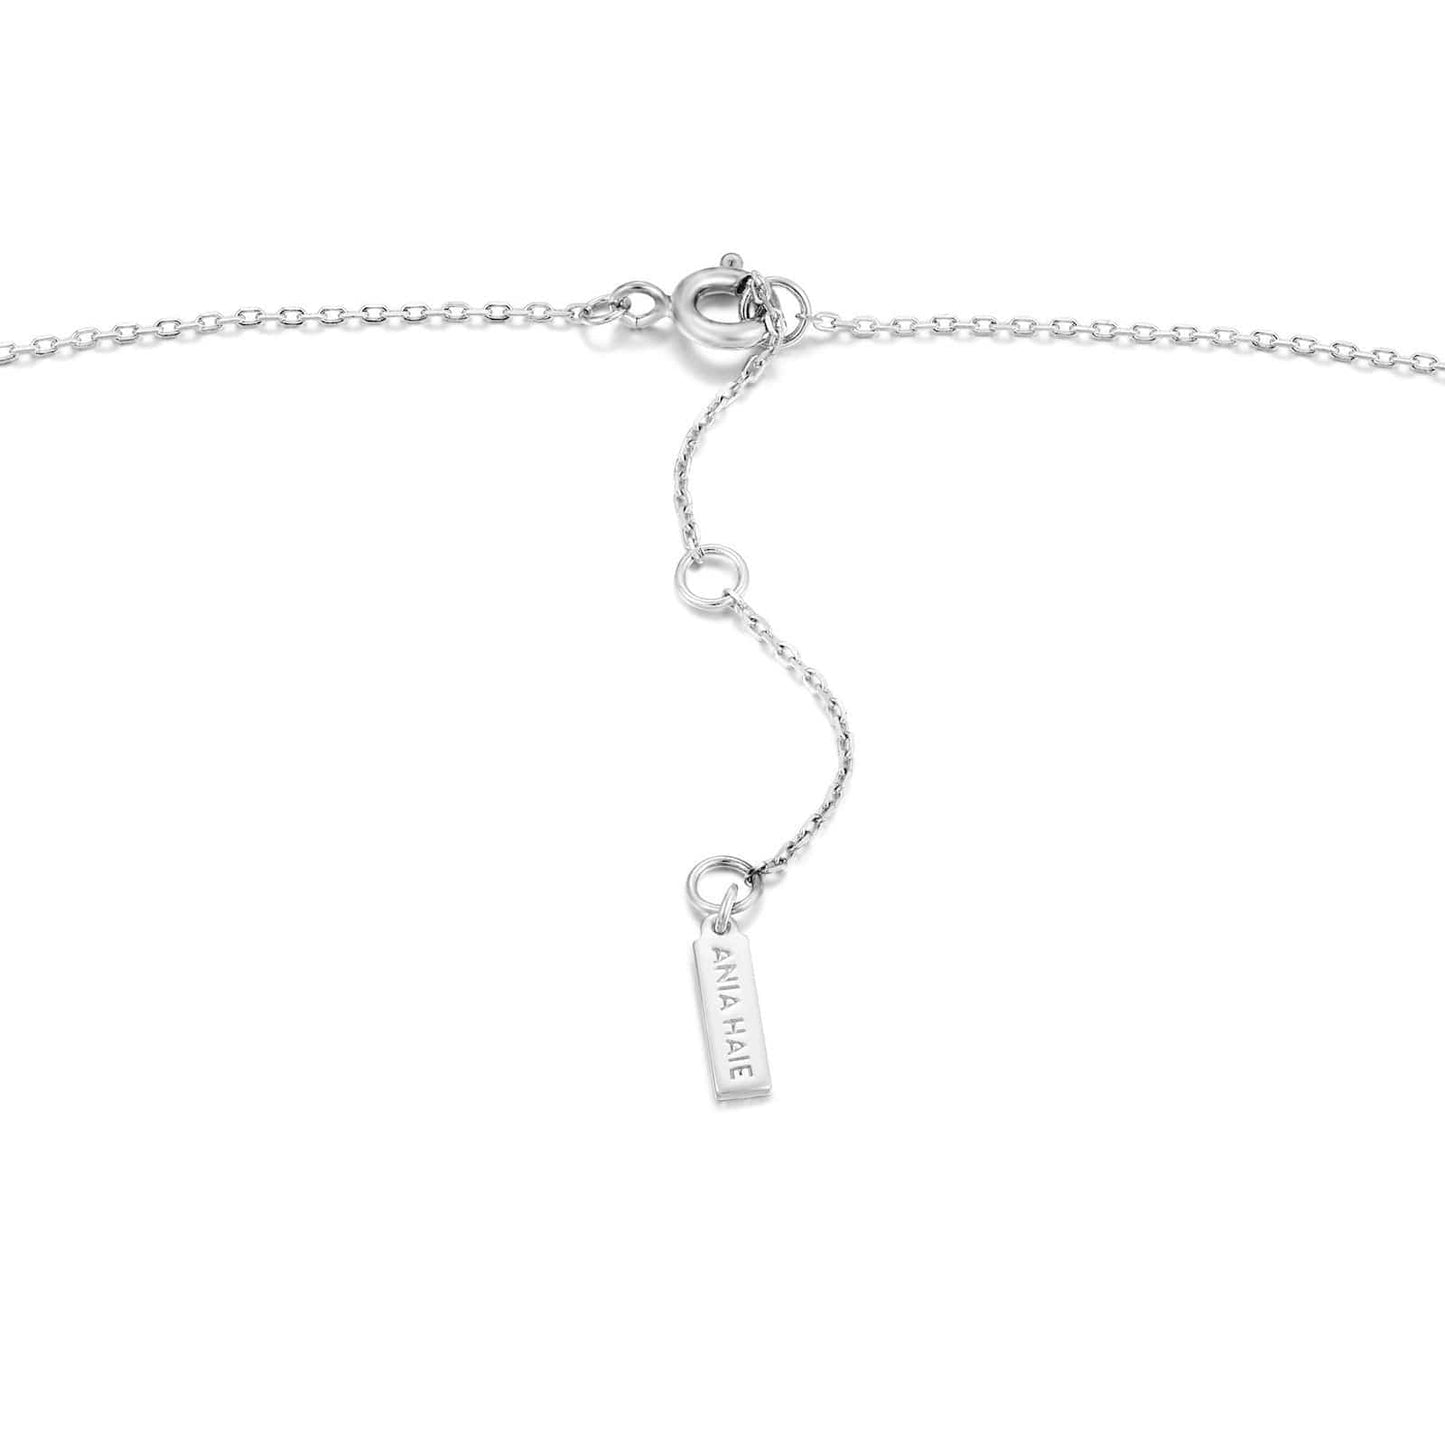 NKL Silver Pearl Necklace